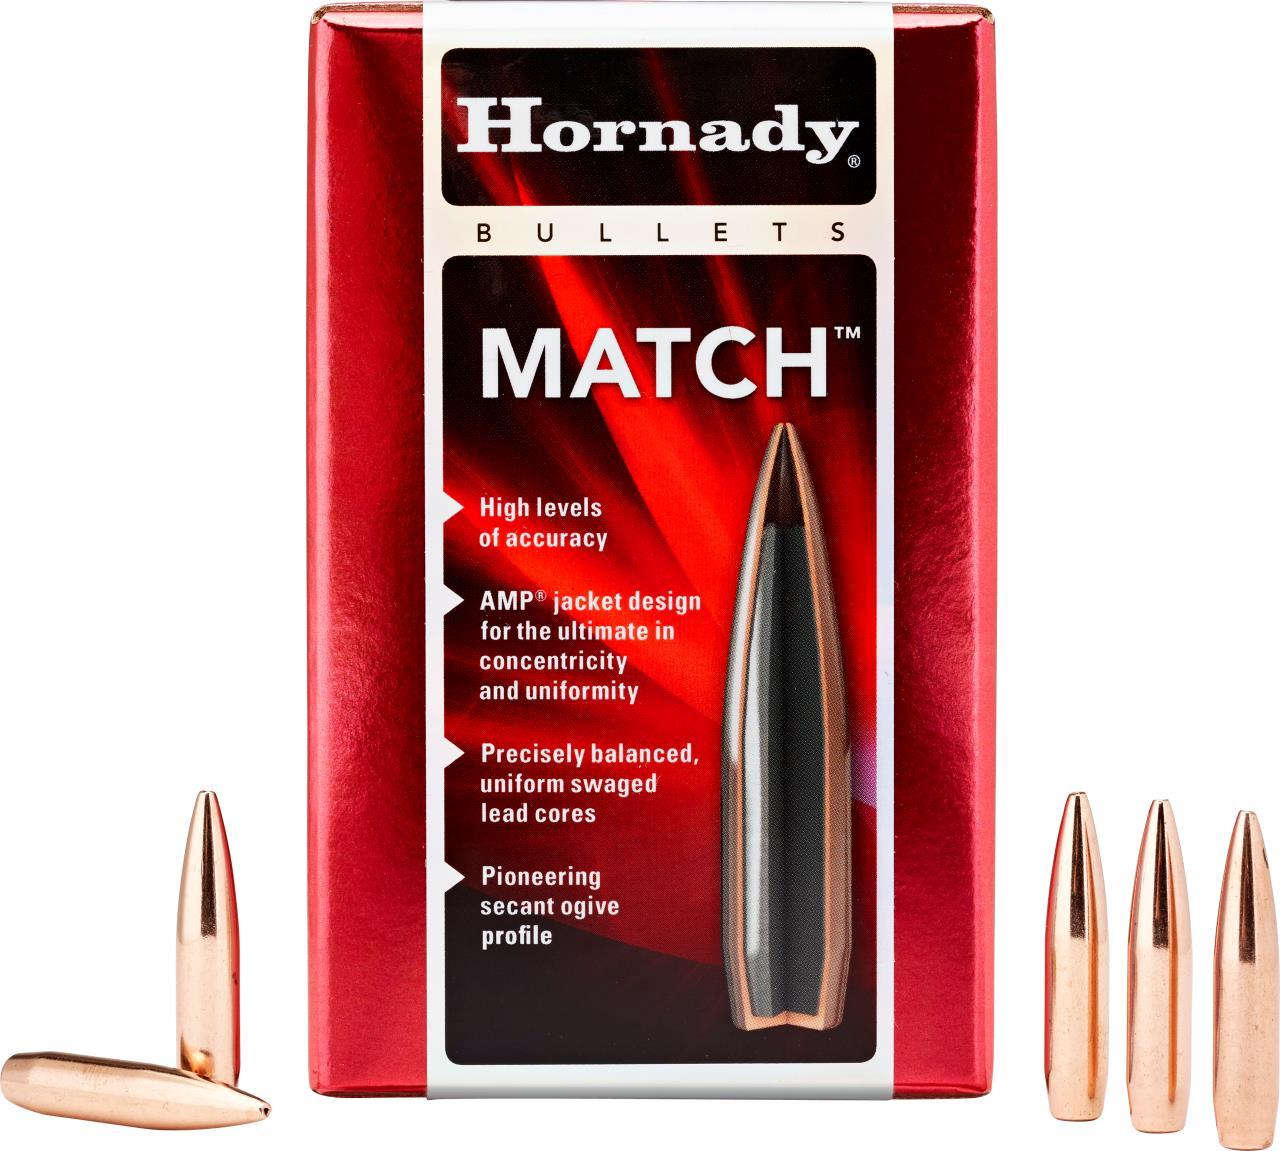 100 ogives Hornady calibre 22 (.224) 68 gr / 4,40 g Boat Tail Hollow Point